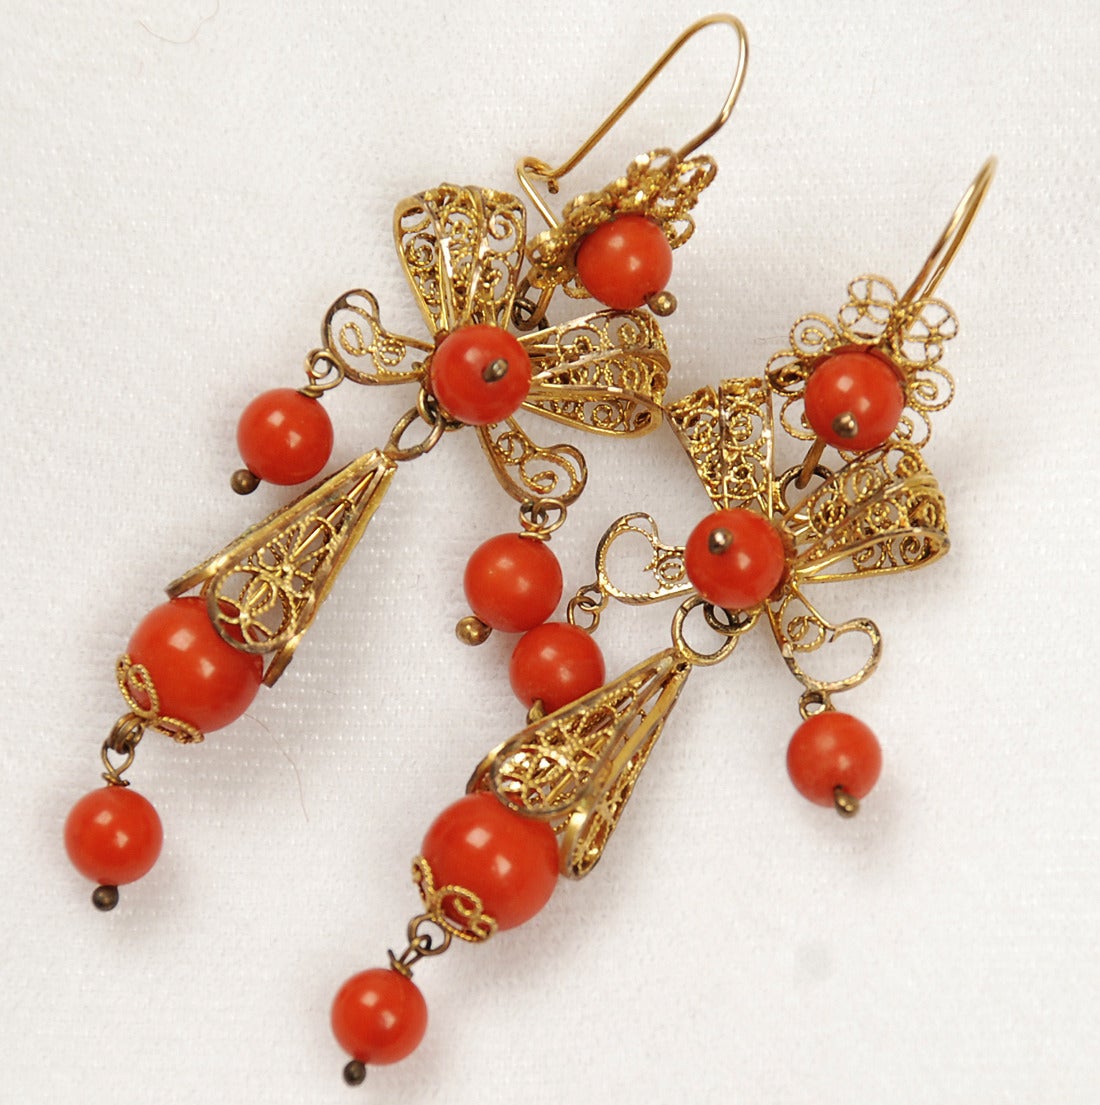 A pair of good antique Mexican earrings in 12-karat to 14-karat gold with skillfully crafted gold wire, filigree and beautiful coral beads, Oaxaca, circa 1930s-1940s.

Dimensions: Hang 2.25 inches.

Condition is excellent.